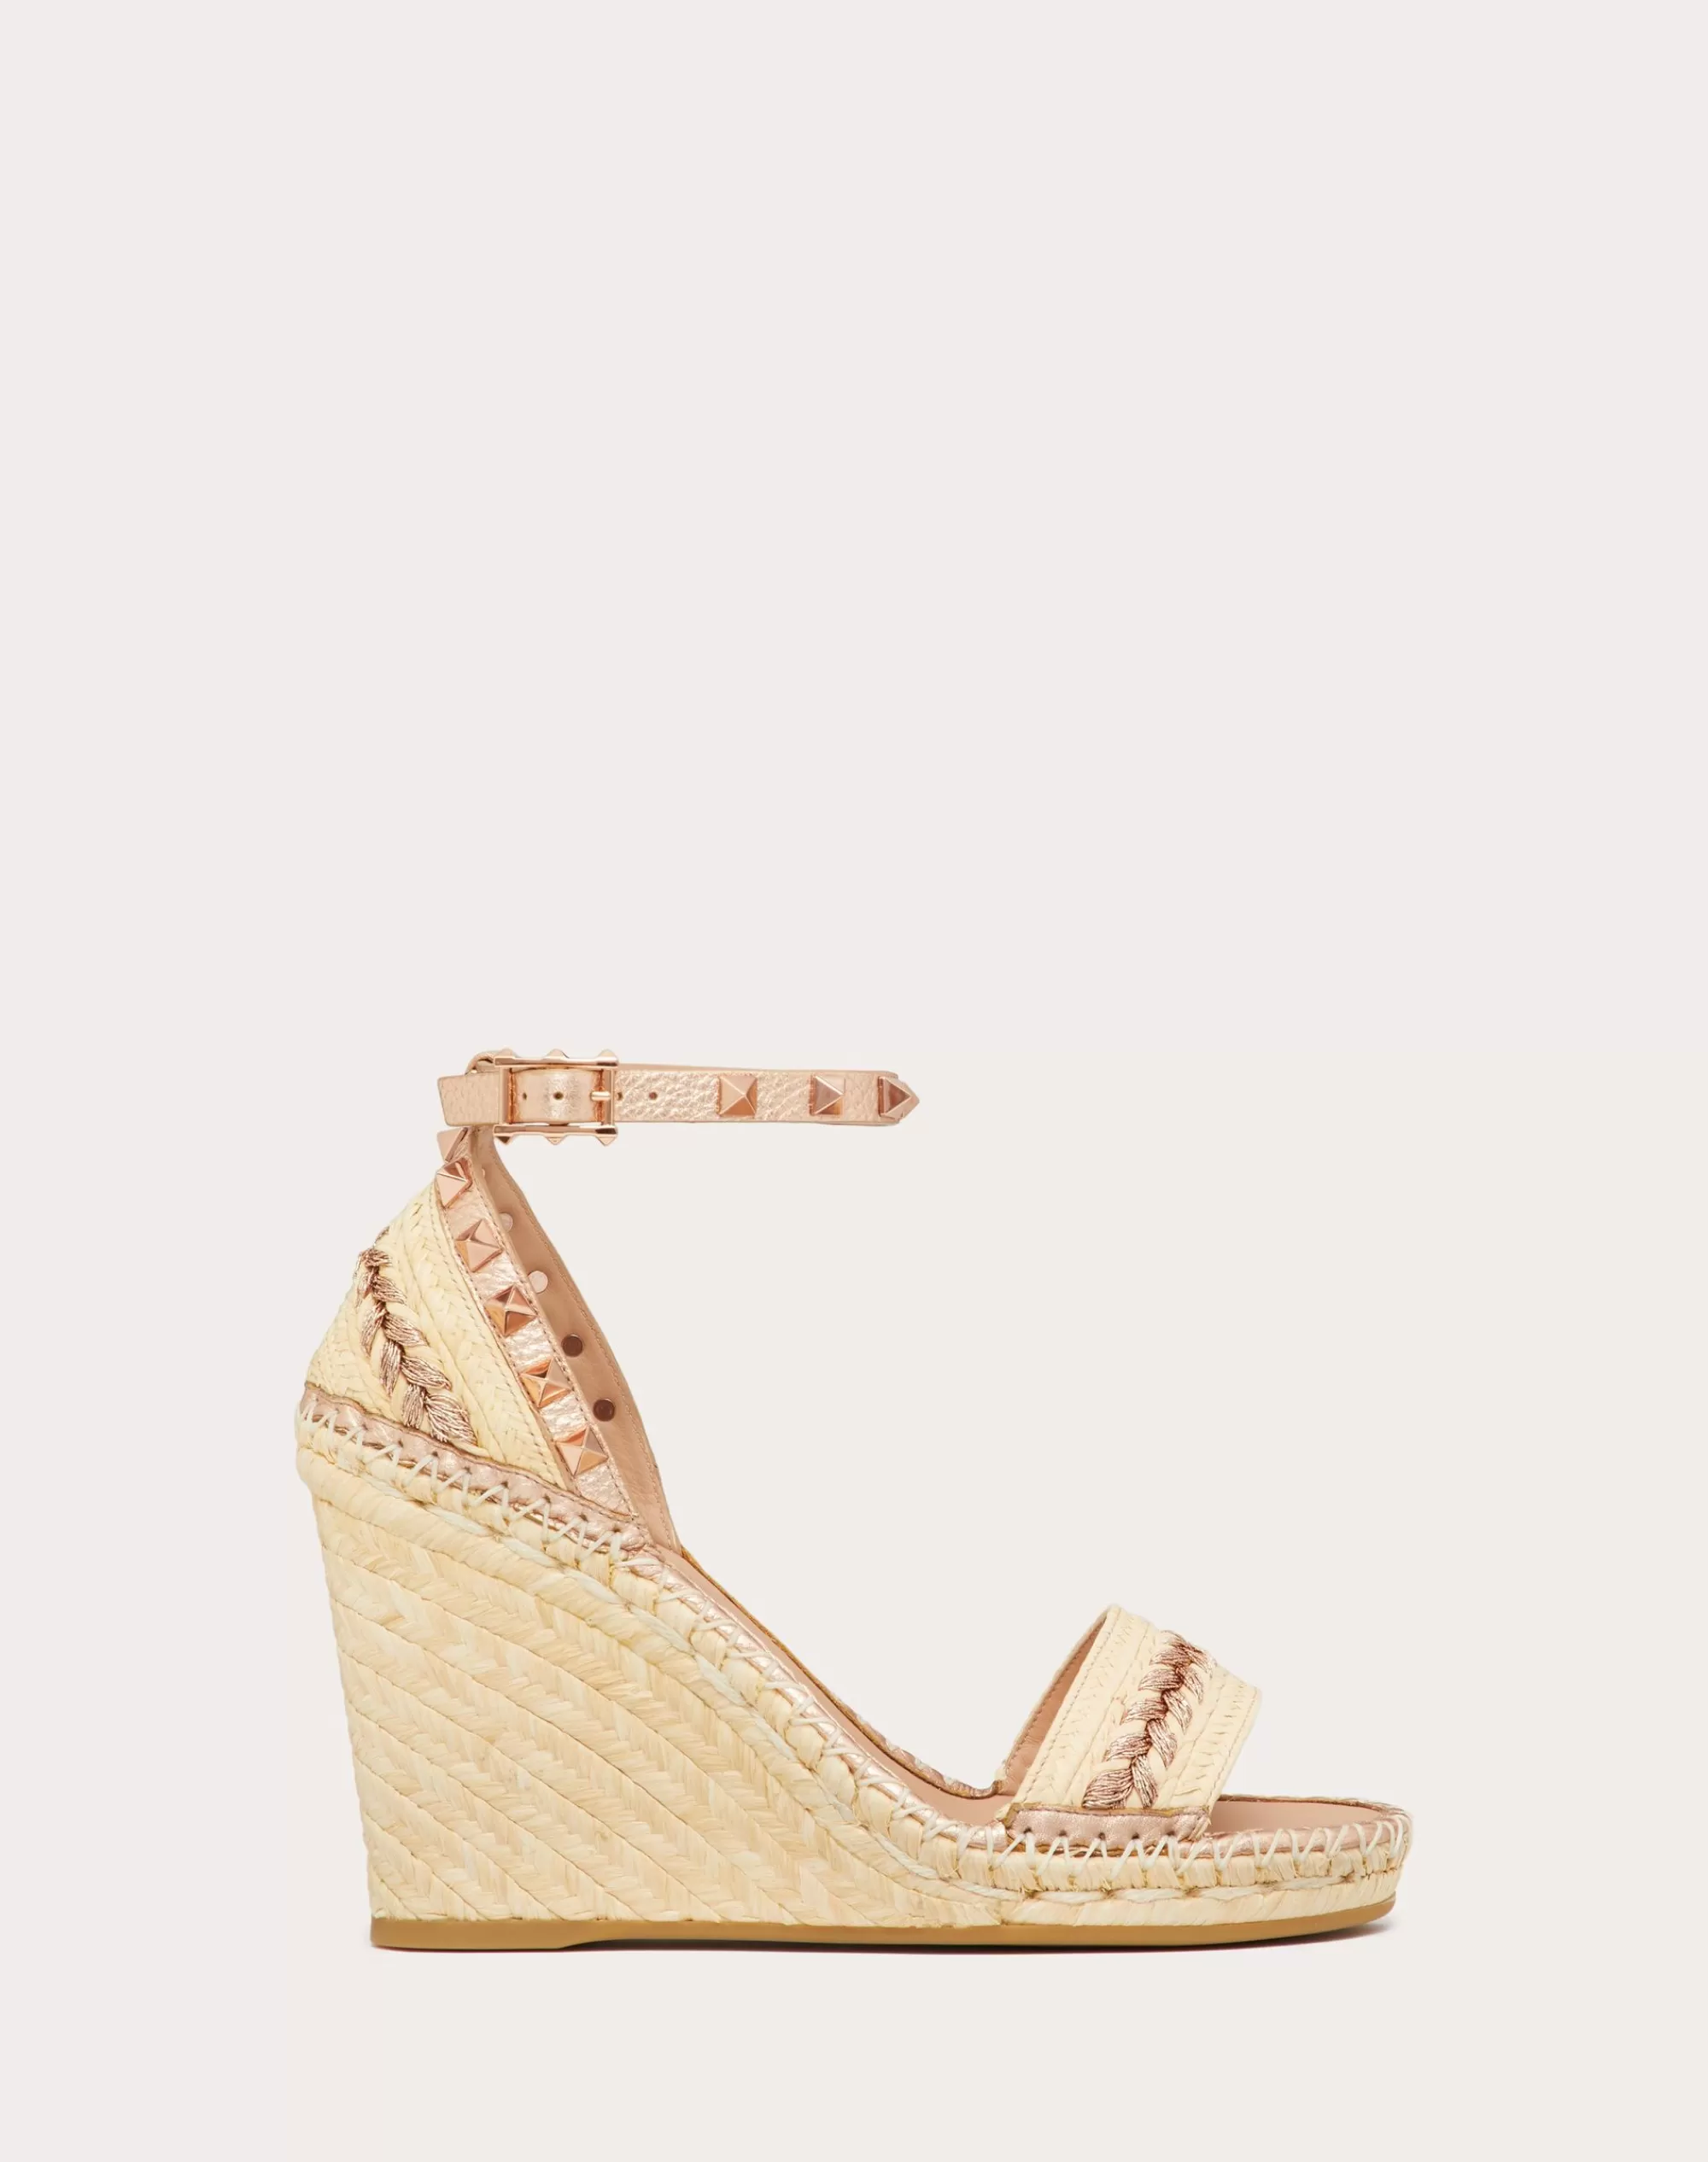 Valentino ROCKSTUD DOUBLE RAFFIA WEDGE SANDAL WITH TONE-ON-TONE STUDS 105MM Natural/copper Store